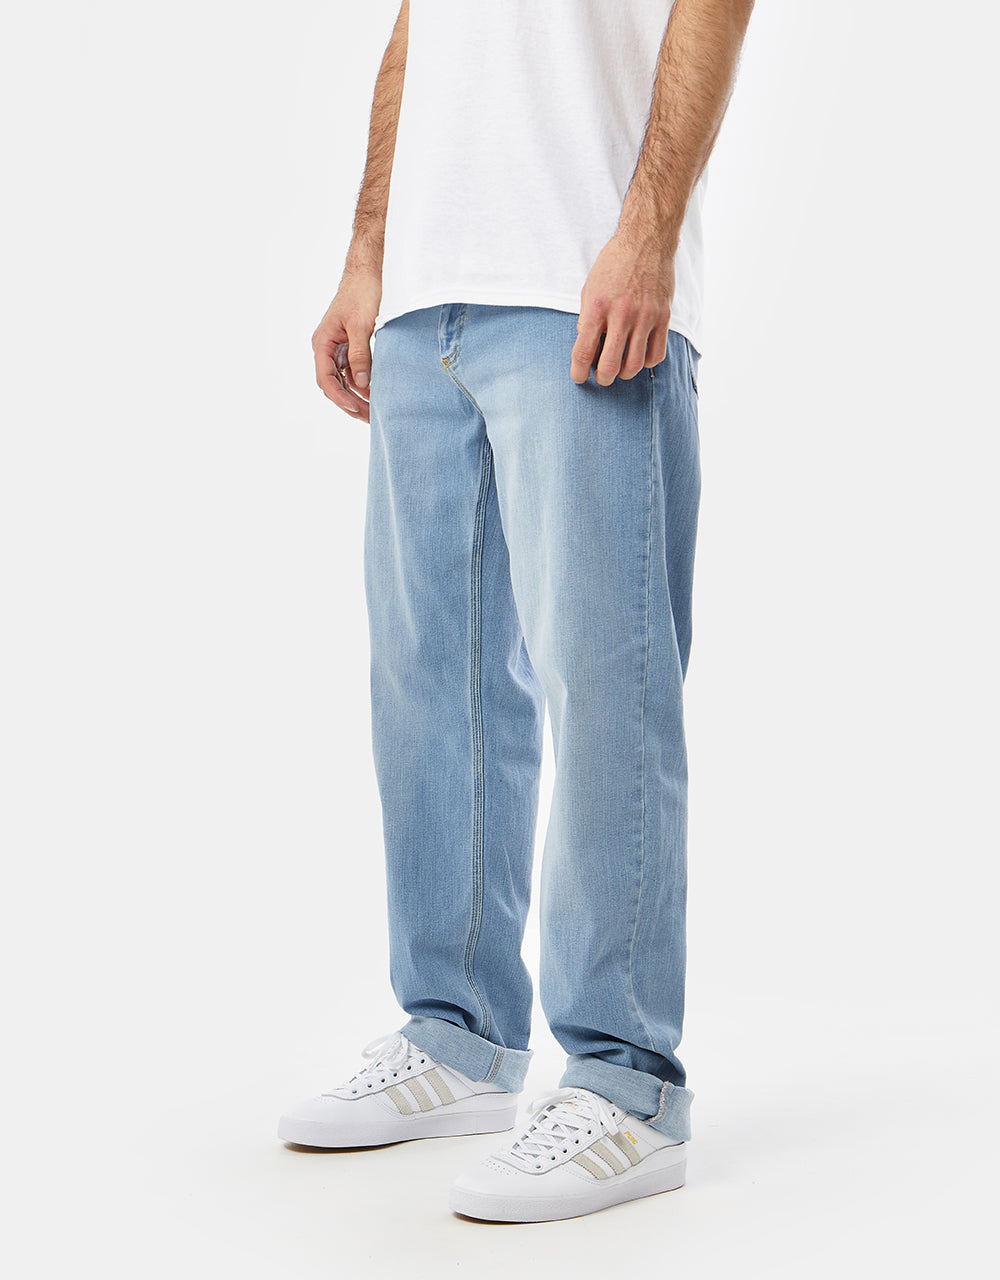 Route One Nineties Denim Jeans - Stone Wash